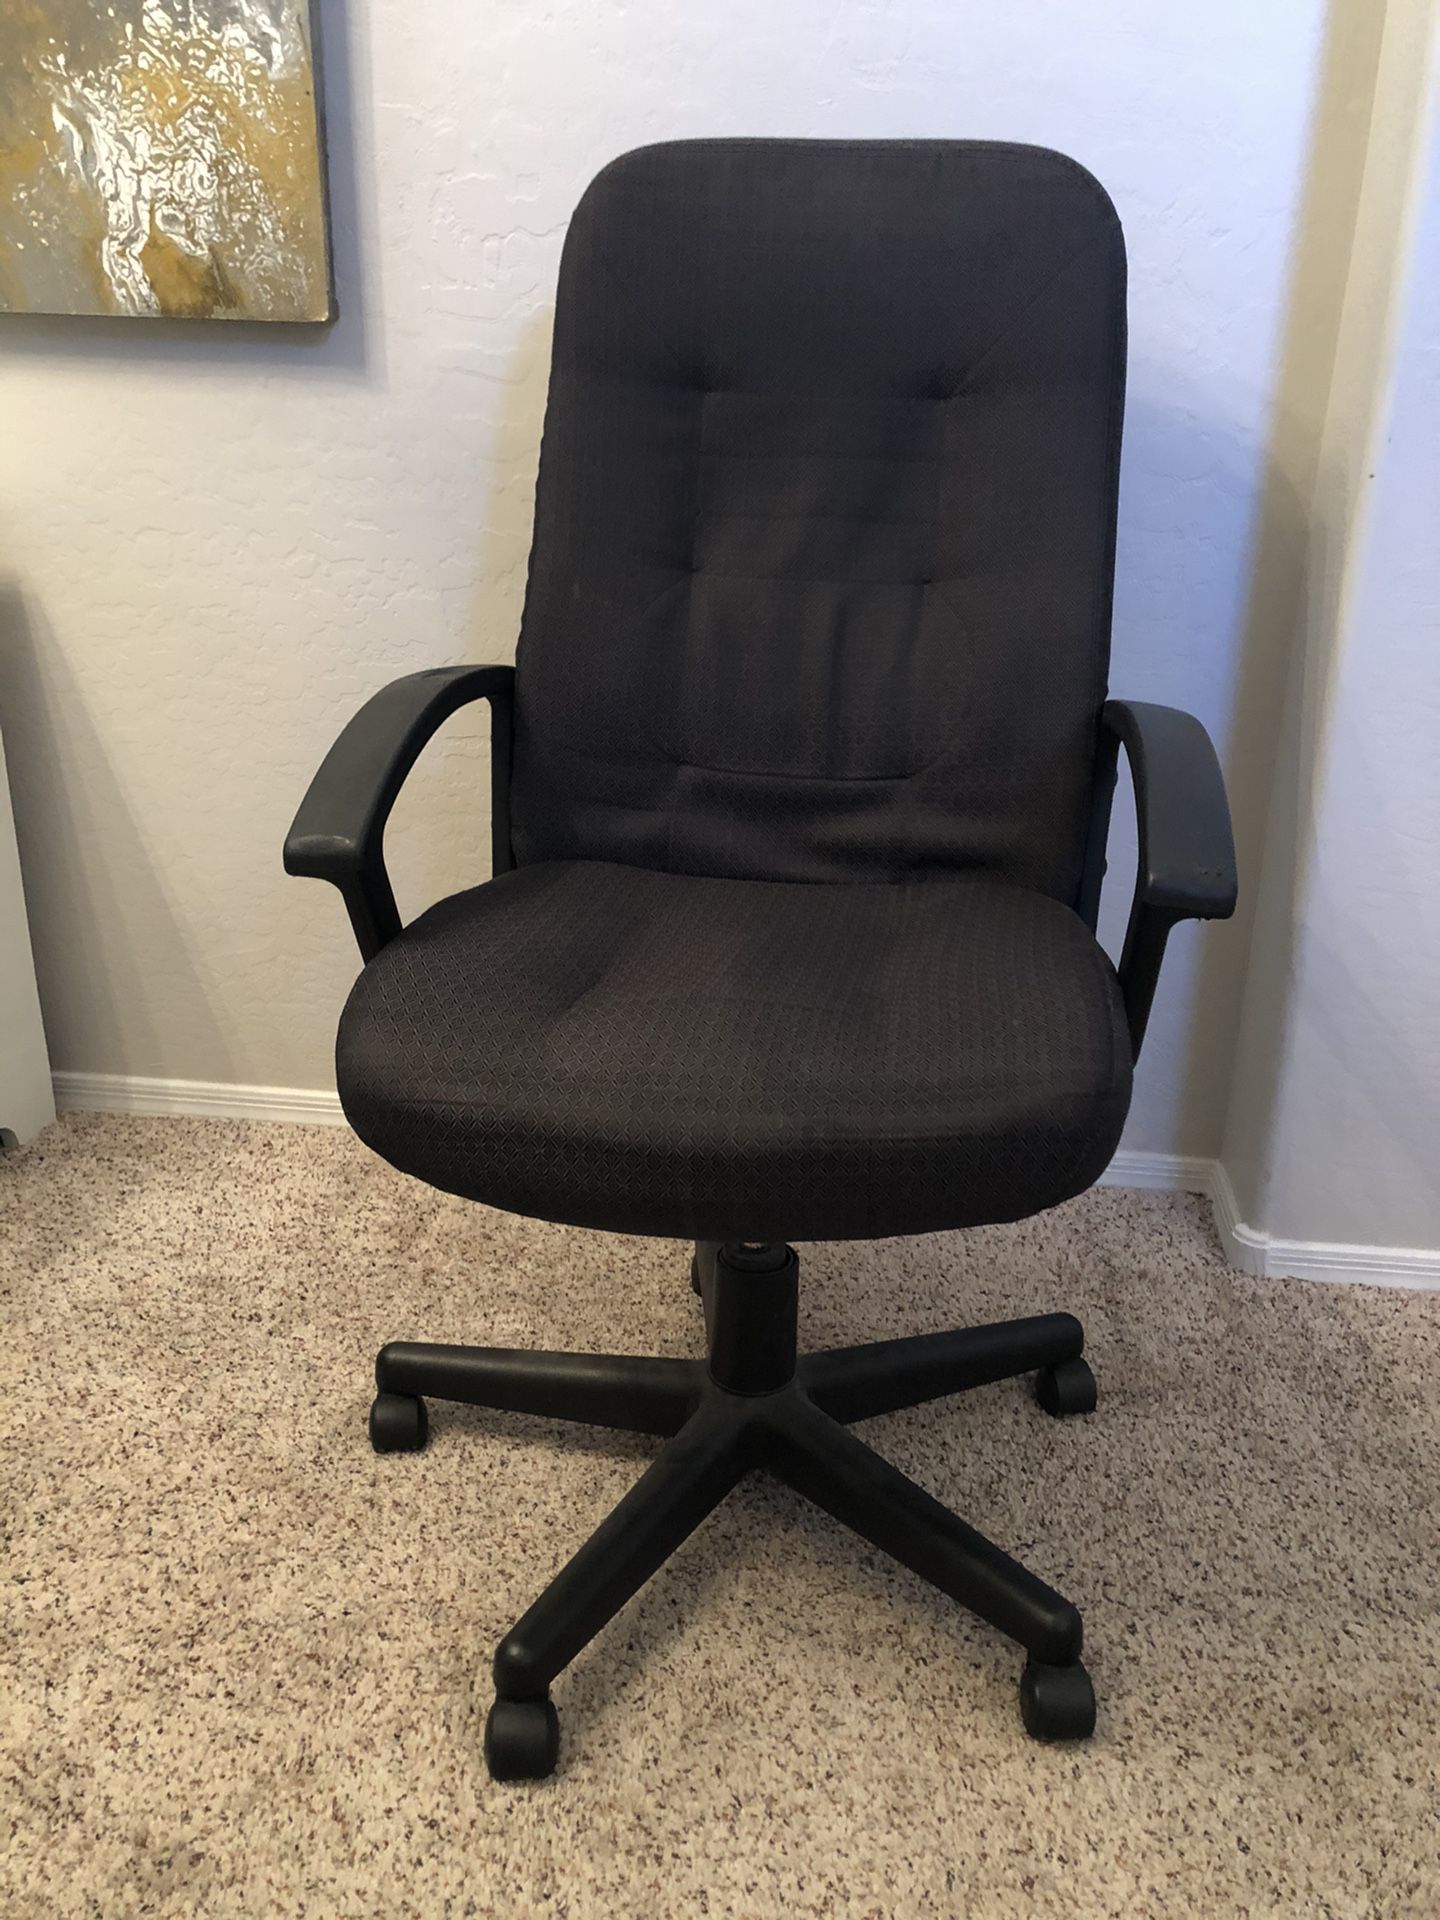 Charcoal grey black office chair